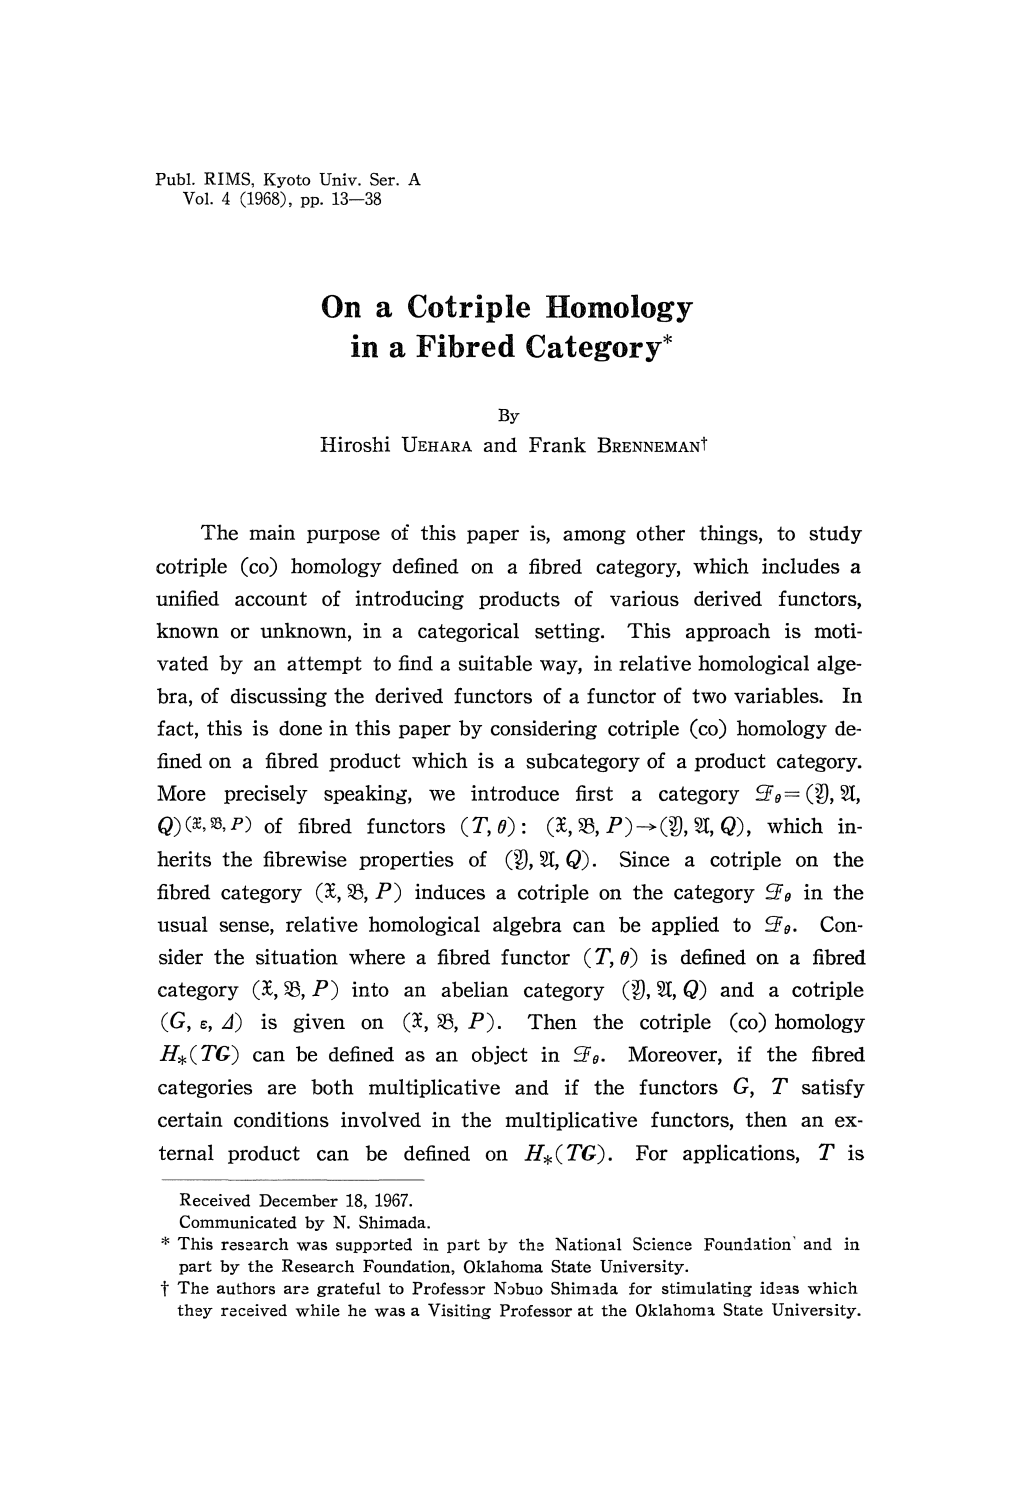 On a Cotriple Homology in a Fibred Category*